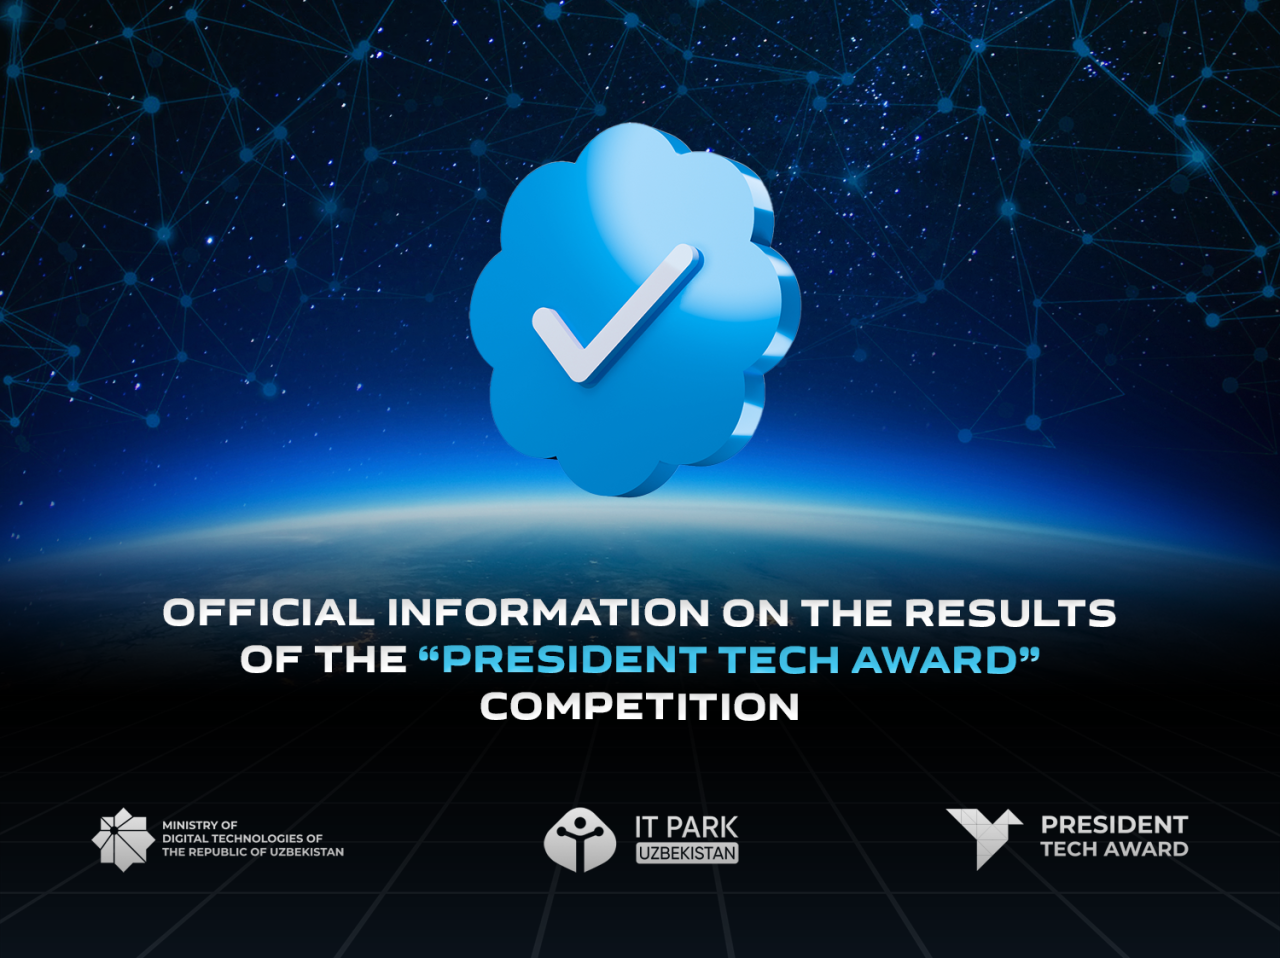 Official information on the results of the President Tech Award competition